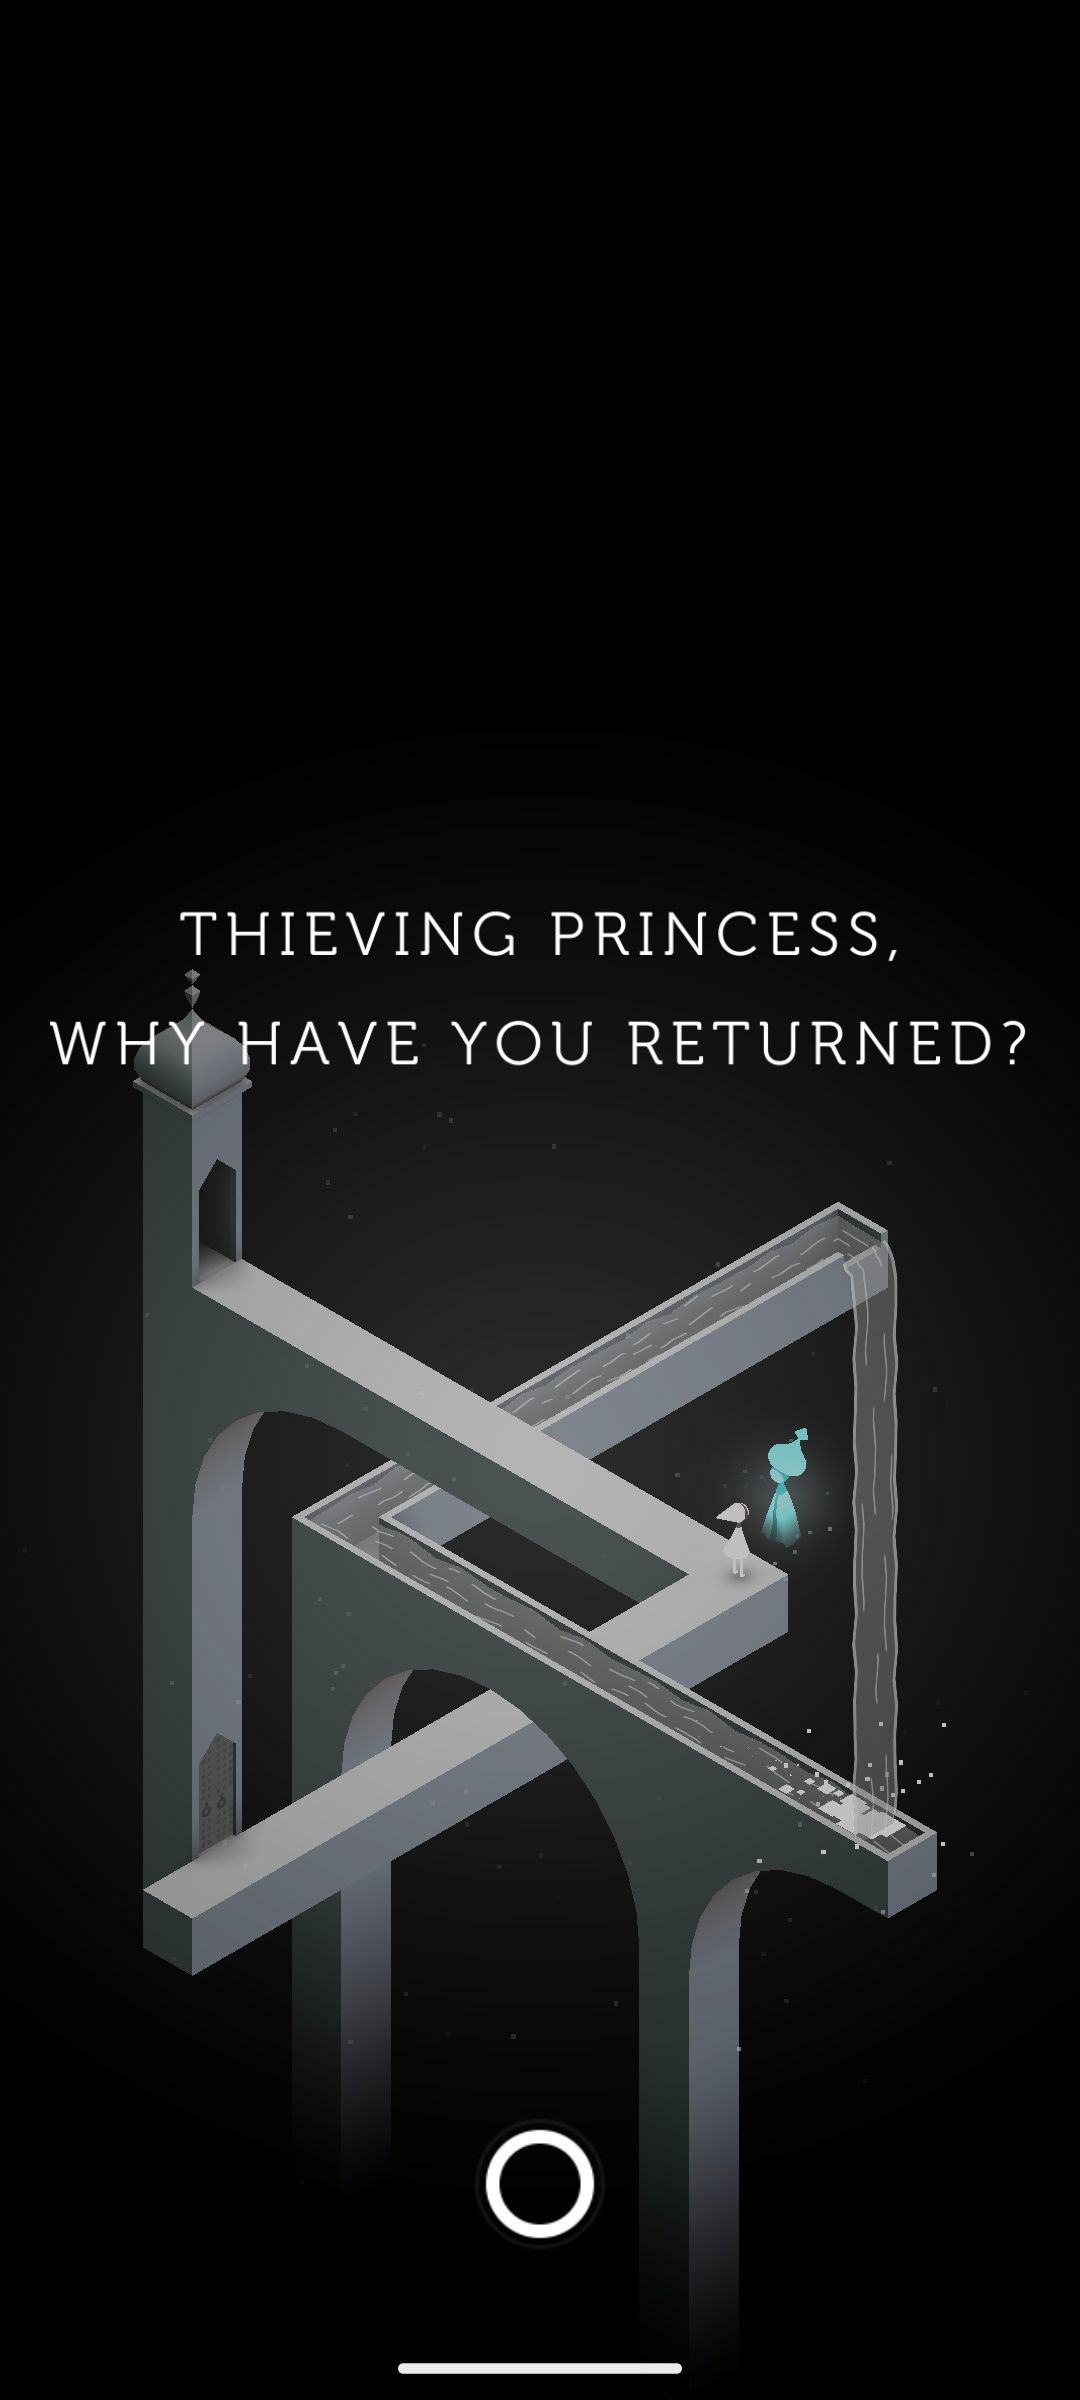 Accusation made against The Princess in Monument Valley